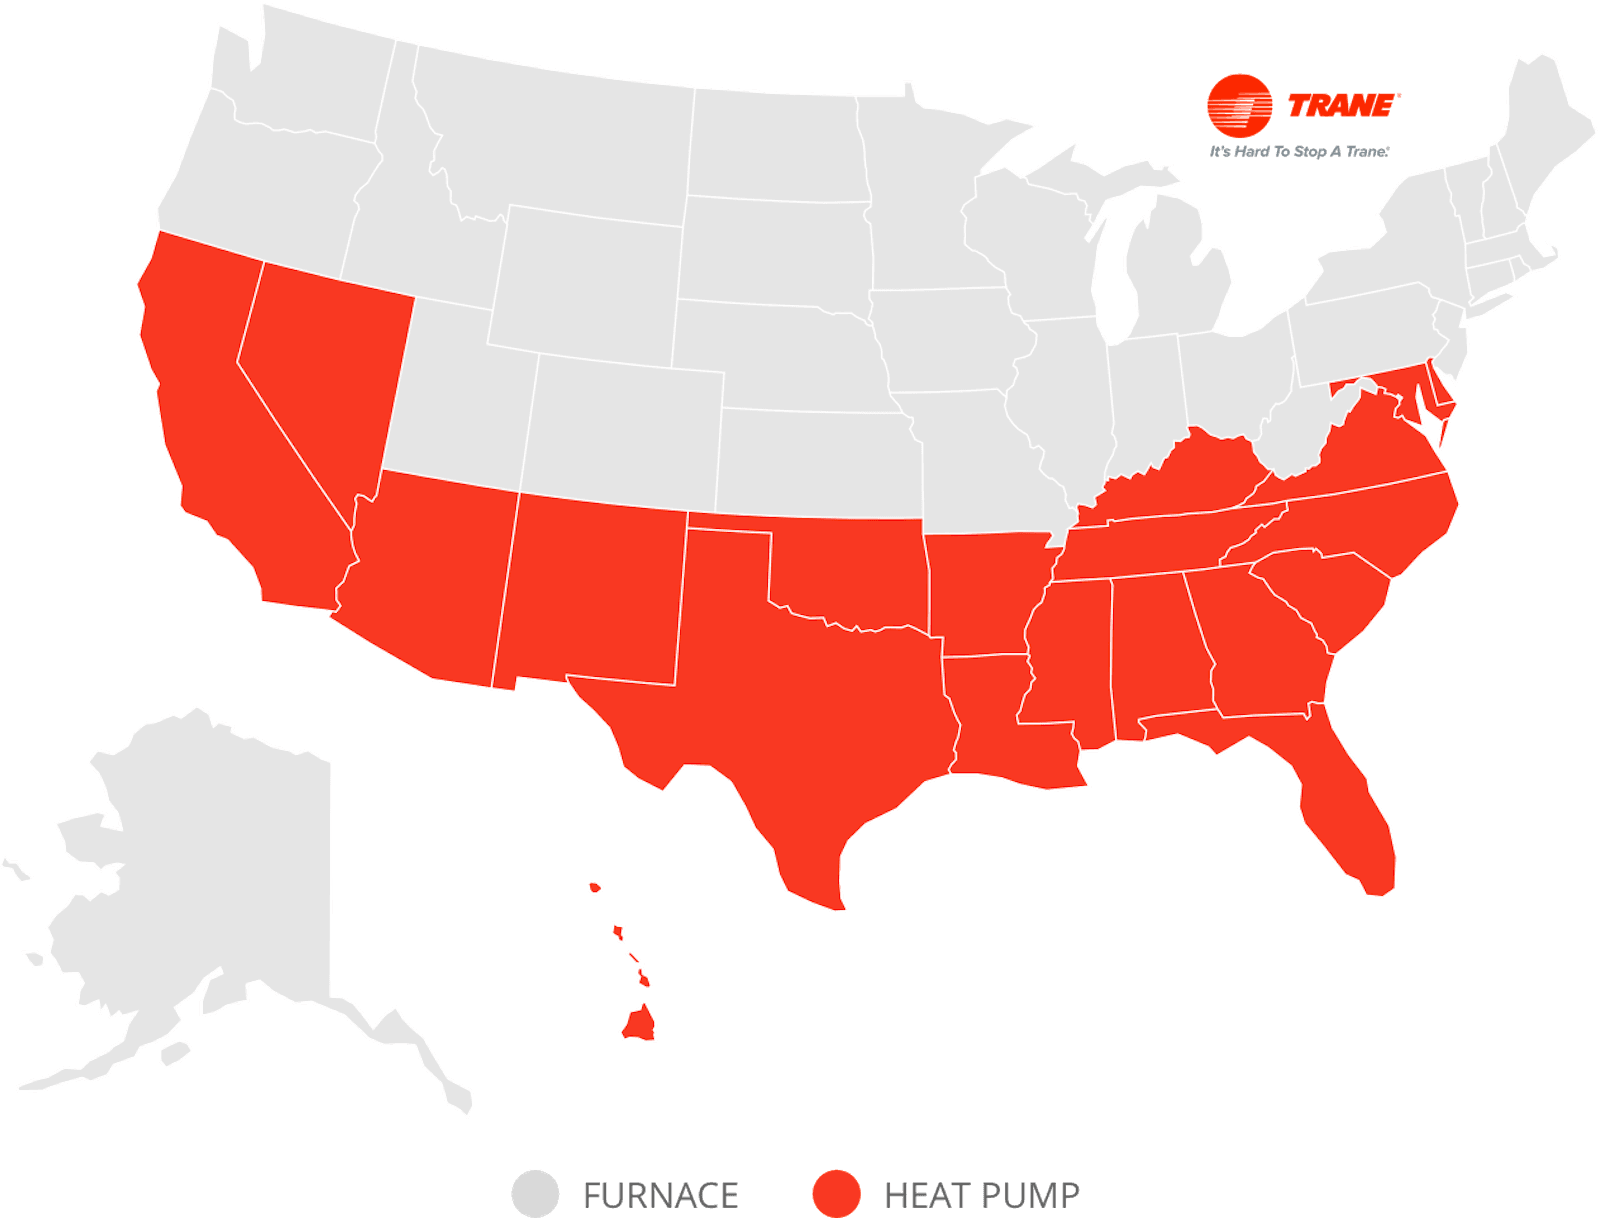 The southern half of the United States is turned red while the northern half is gray on a map of the country.